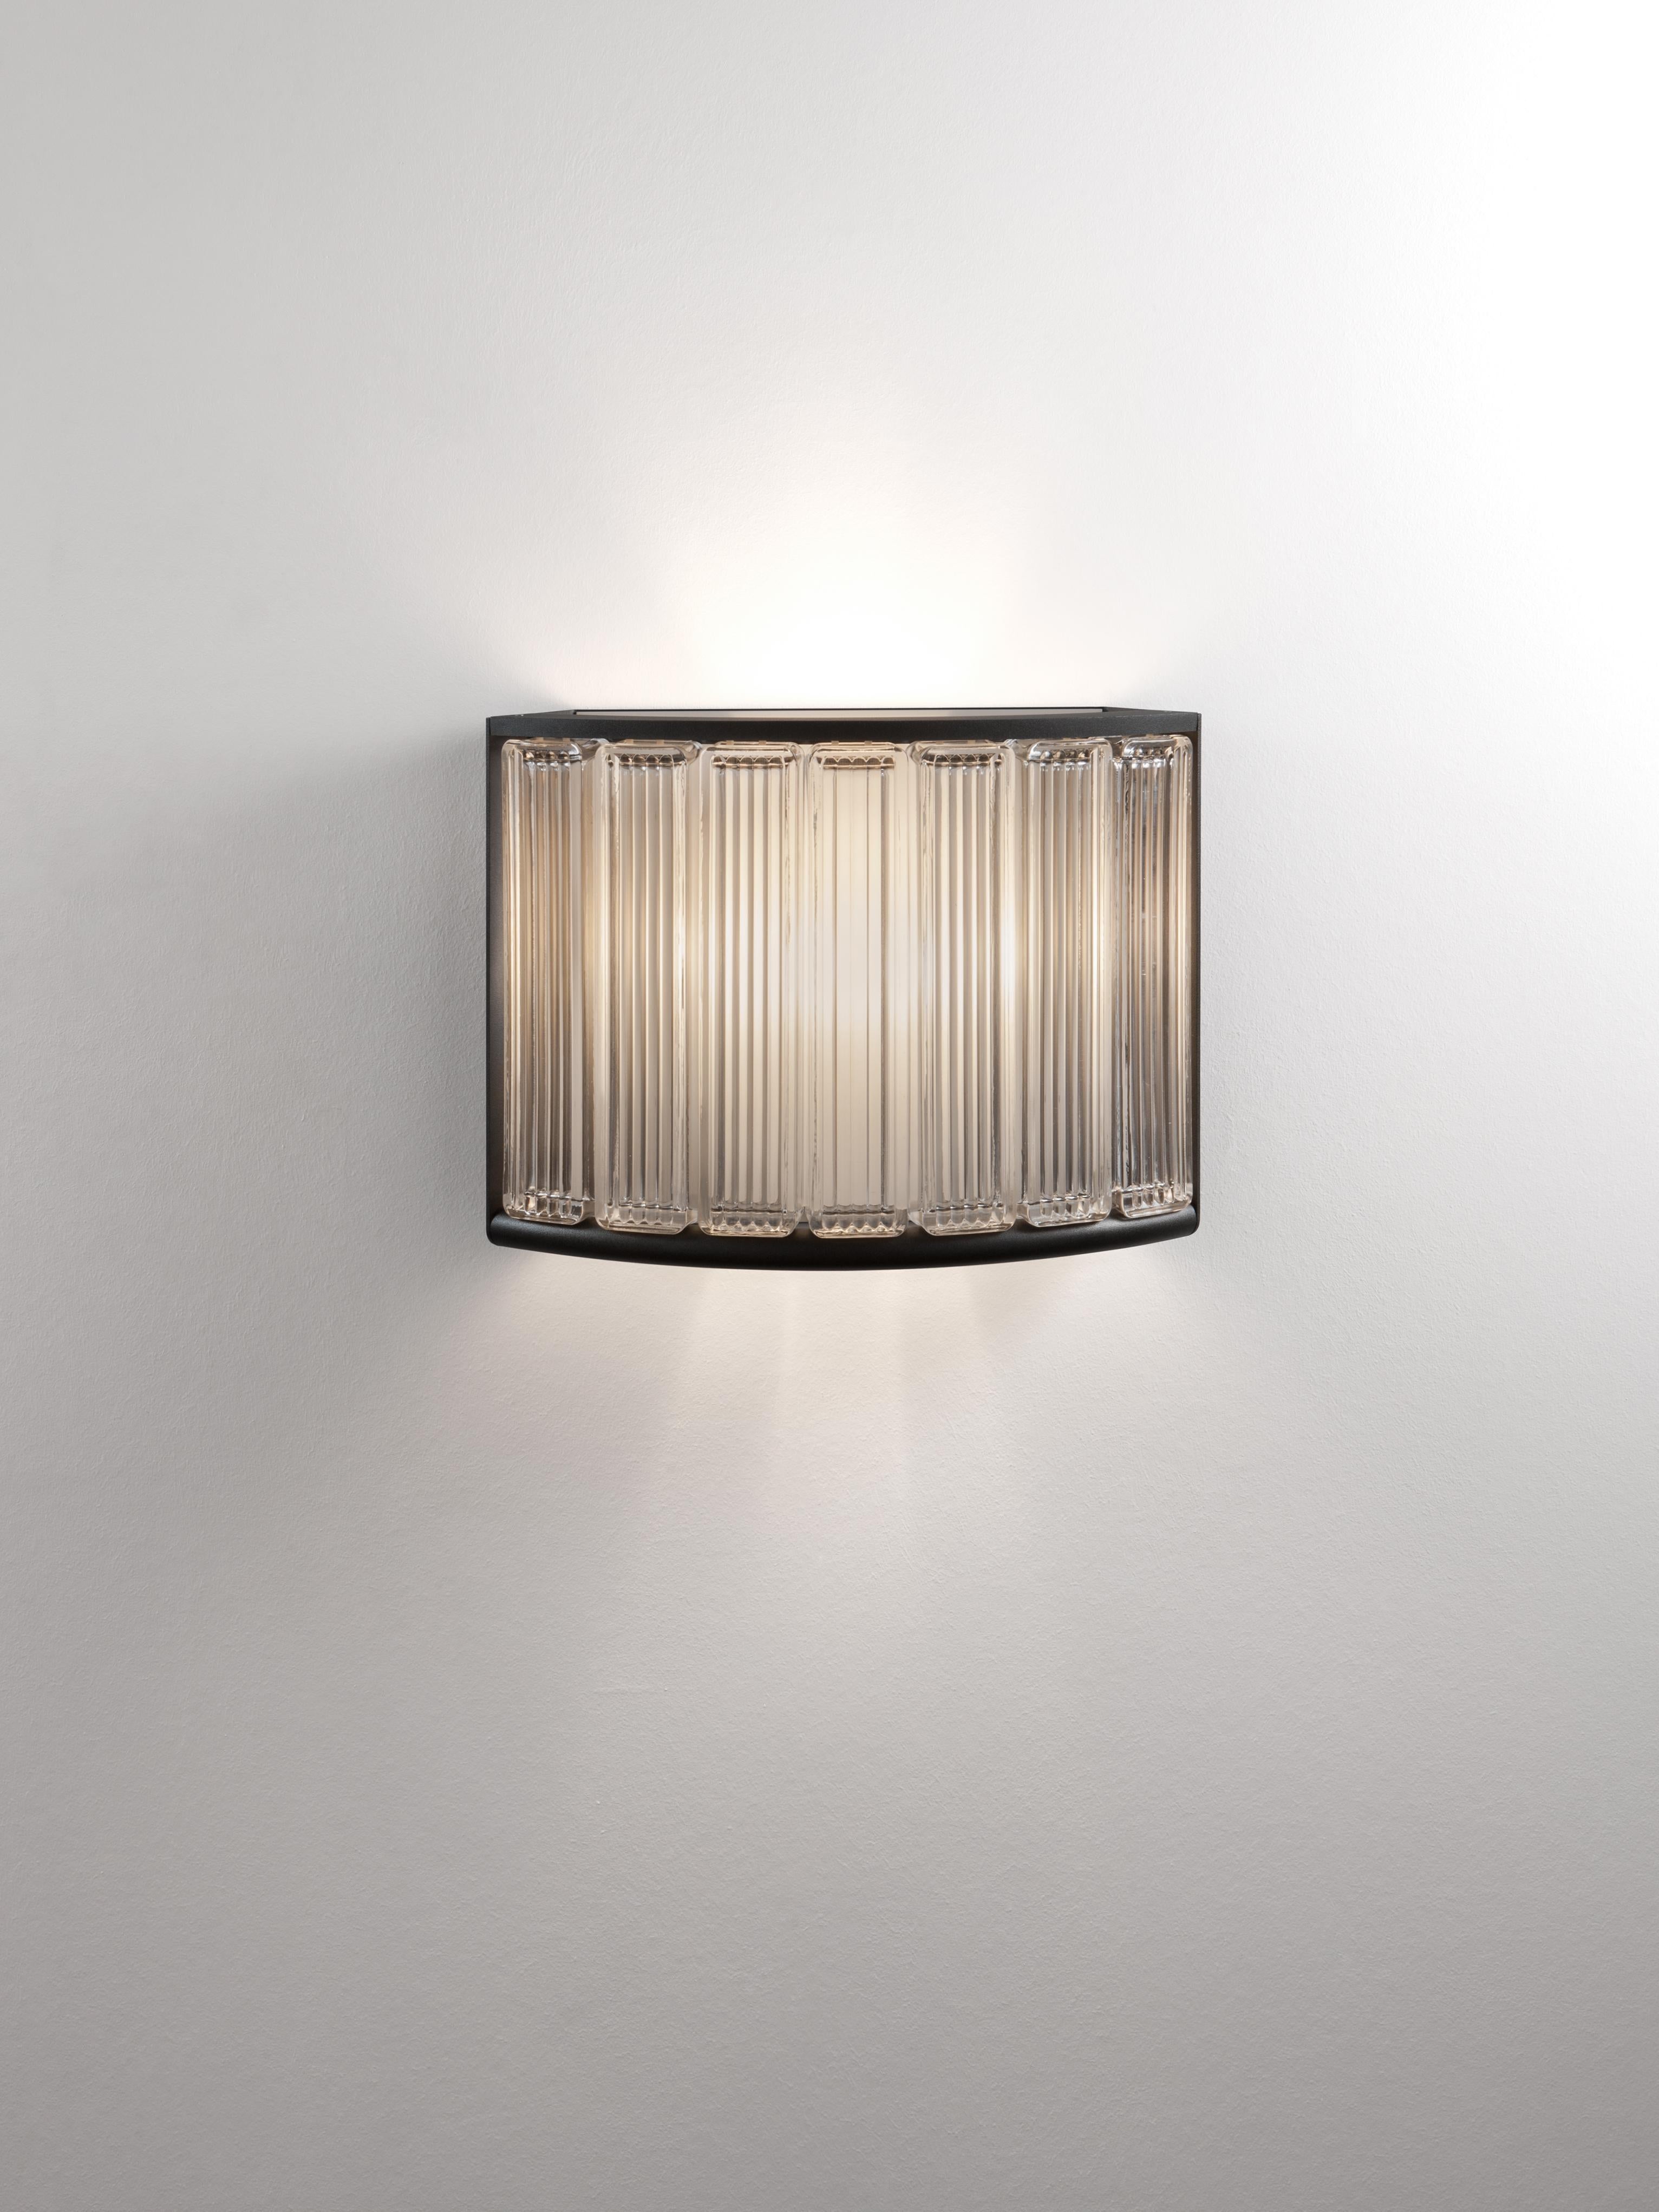 Estadio wall lamp by Miguel Milá
Dimensions: D 44 x W 14 x H 33 cm
Materials: Metal, glass.

Originally designed for the Olympic Stadium in Barcelona 1992, this curved line of lighting ennobles the space around it. The visible sides of its structure